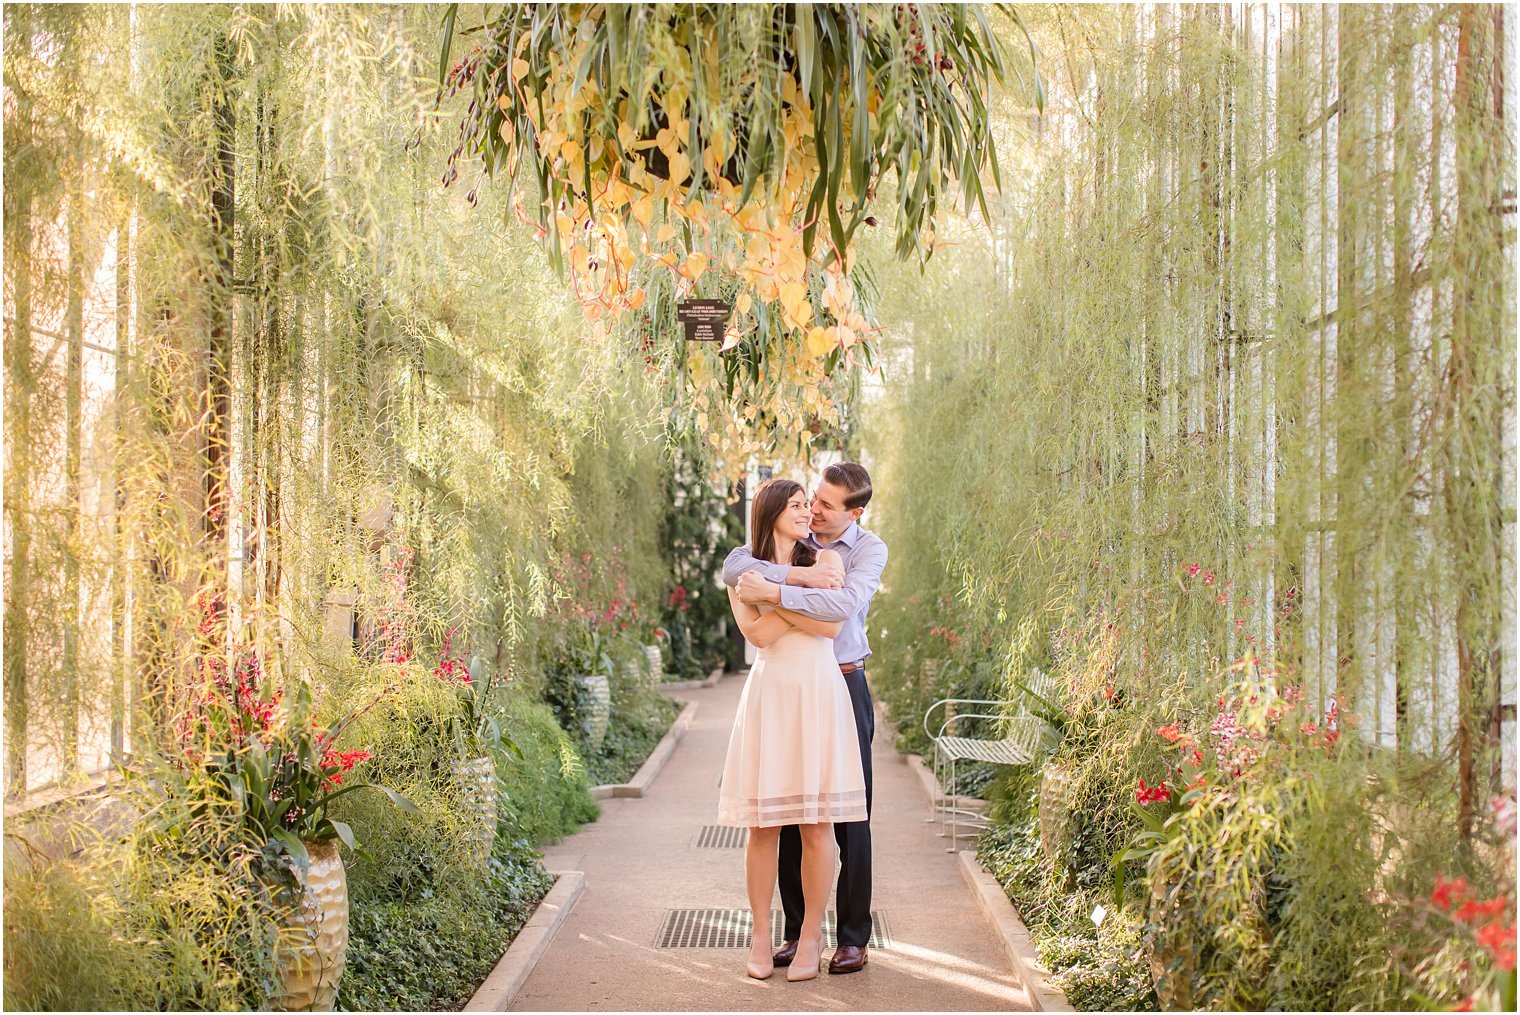 Winter engagement photos at Longwood Gardens